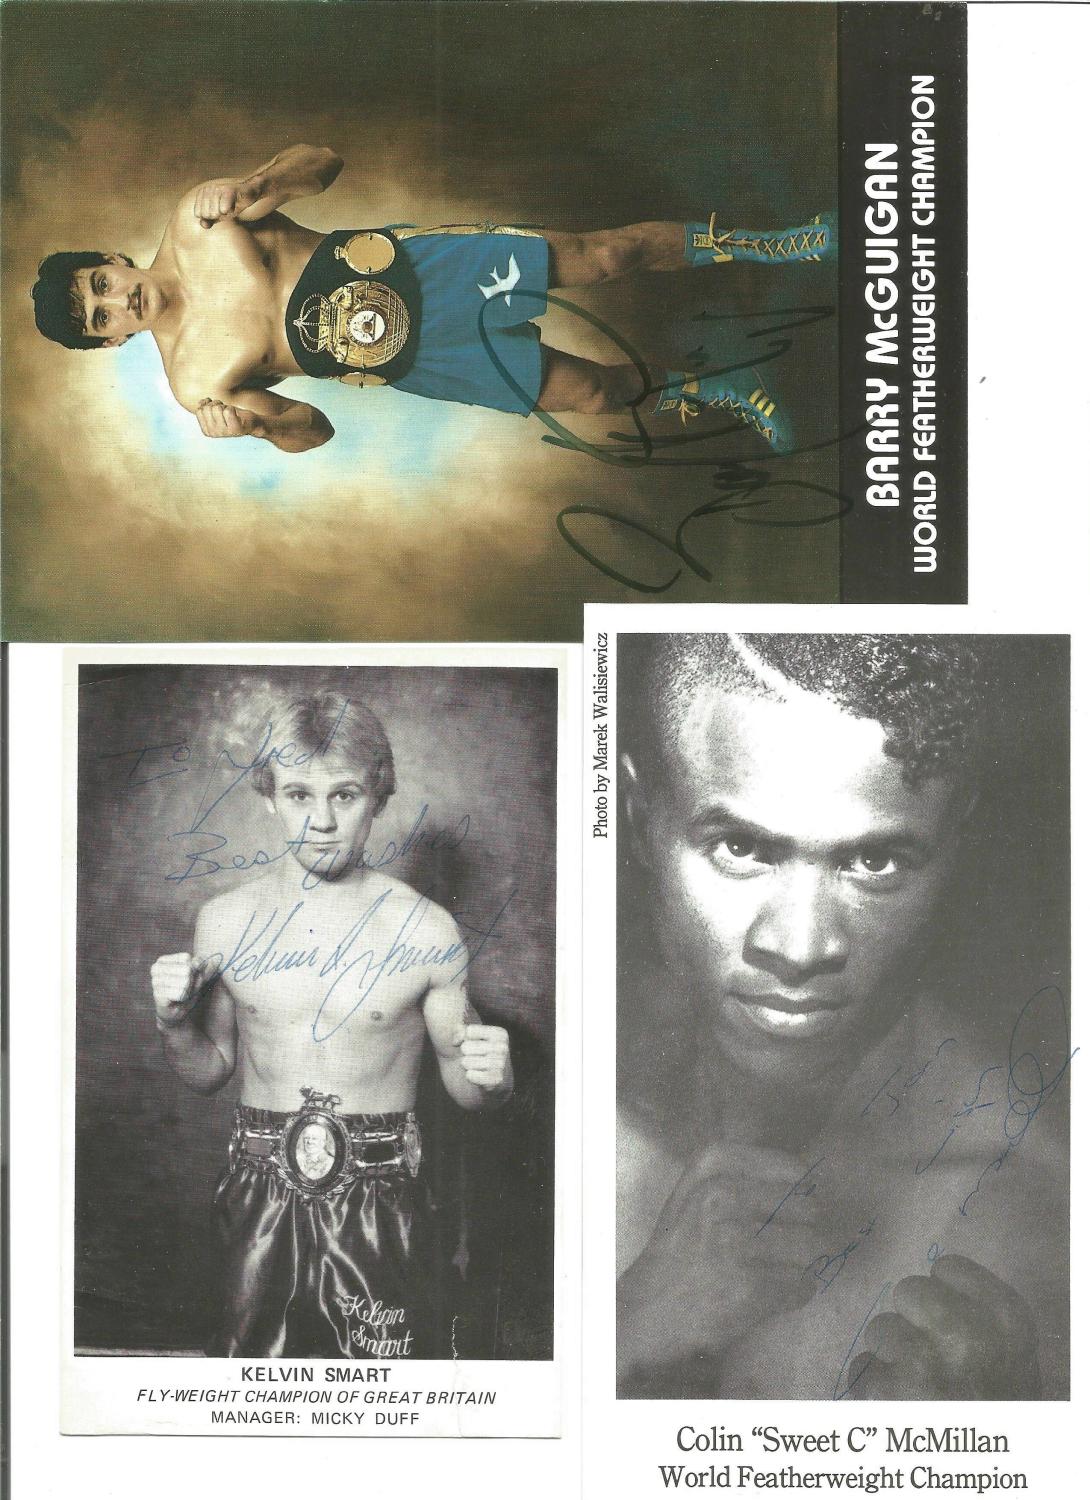 Boxing 3 Signed Photos Barry Mcguigan, Colin Mcmillan & Kelvin Smart. Good Condition. All signed